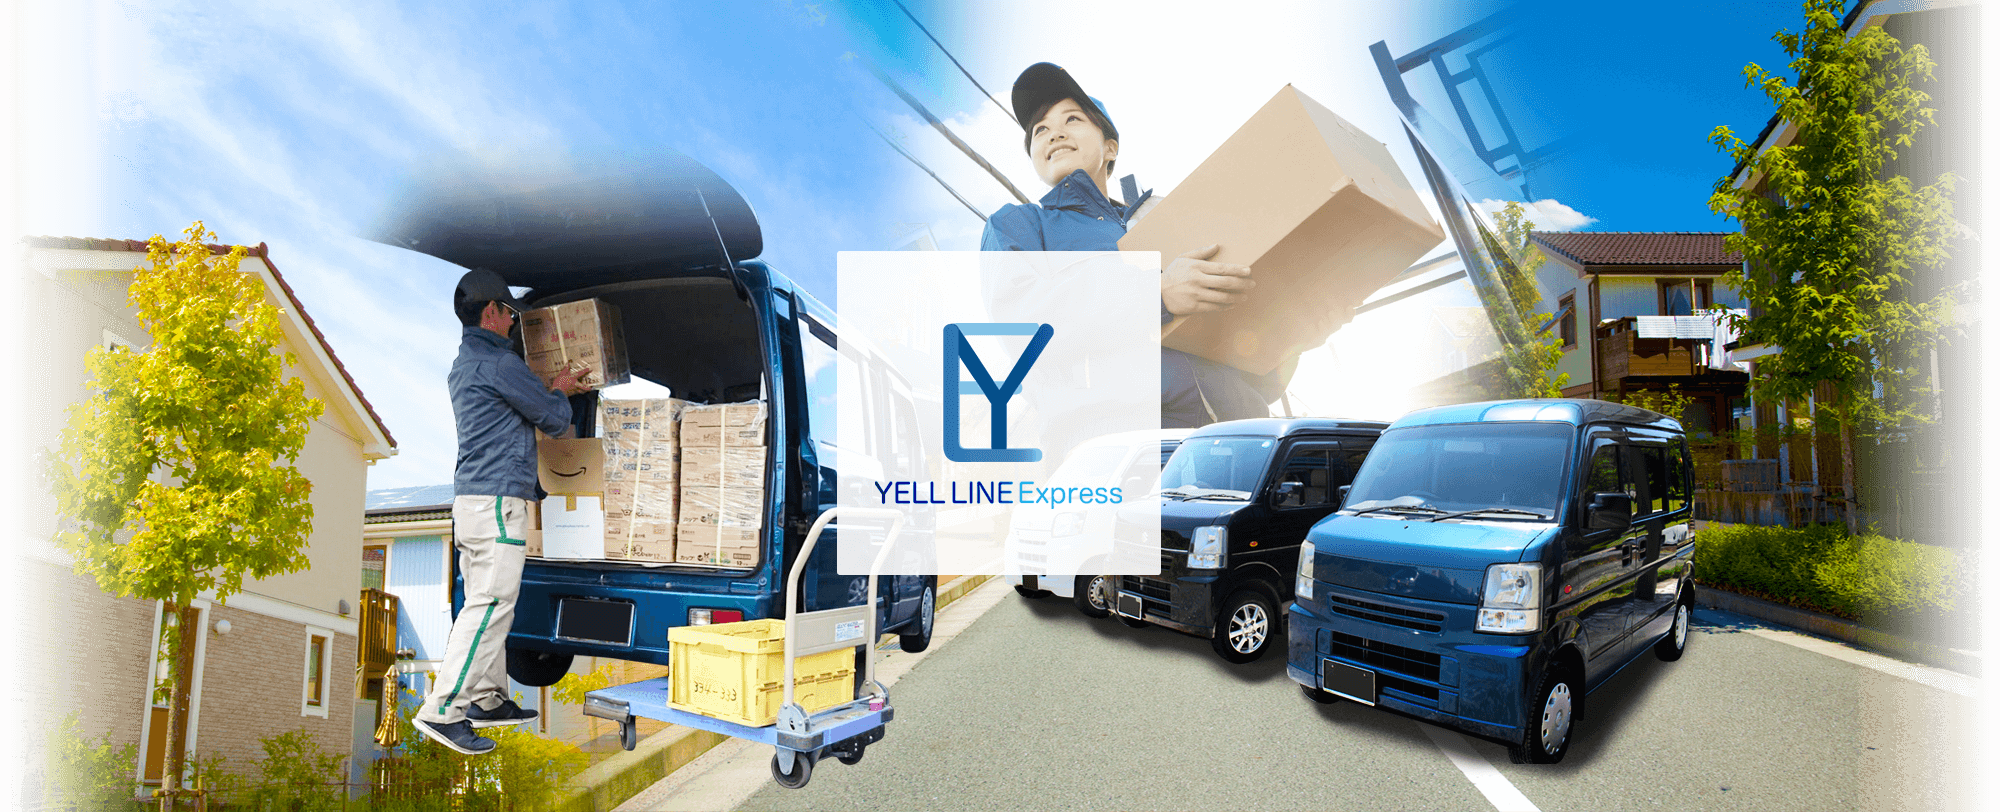 YELL LINE Express